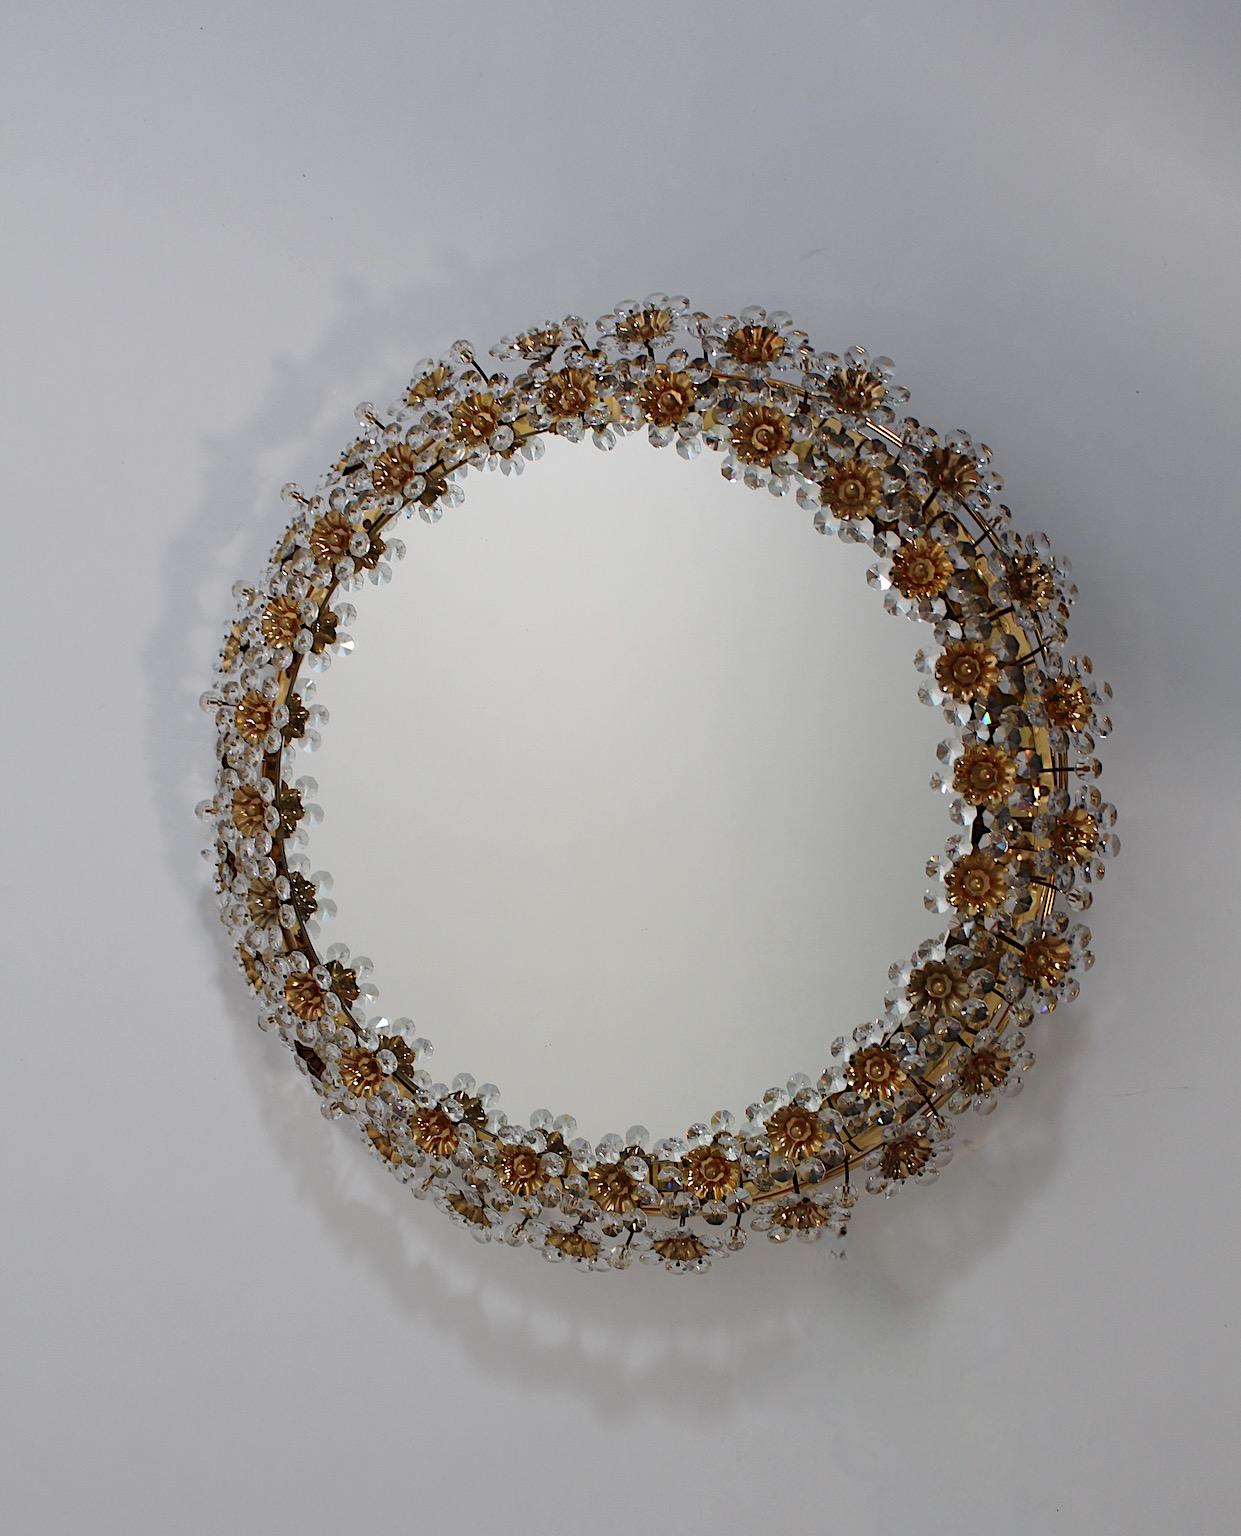 Modern vintage circular wall mirror with backlight from gilt brass and crystal flowers in earthen, gold and clear colors 1960s, Germany.
A stunning wall mirror in circular shape shows a frame decor with clear crystals and golden colored